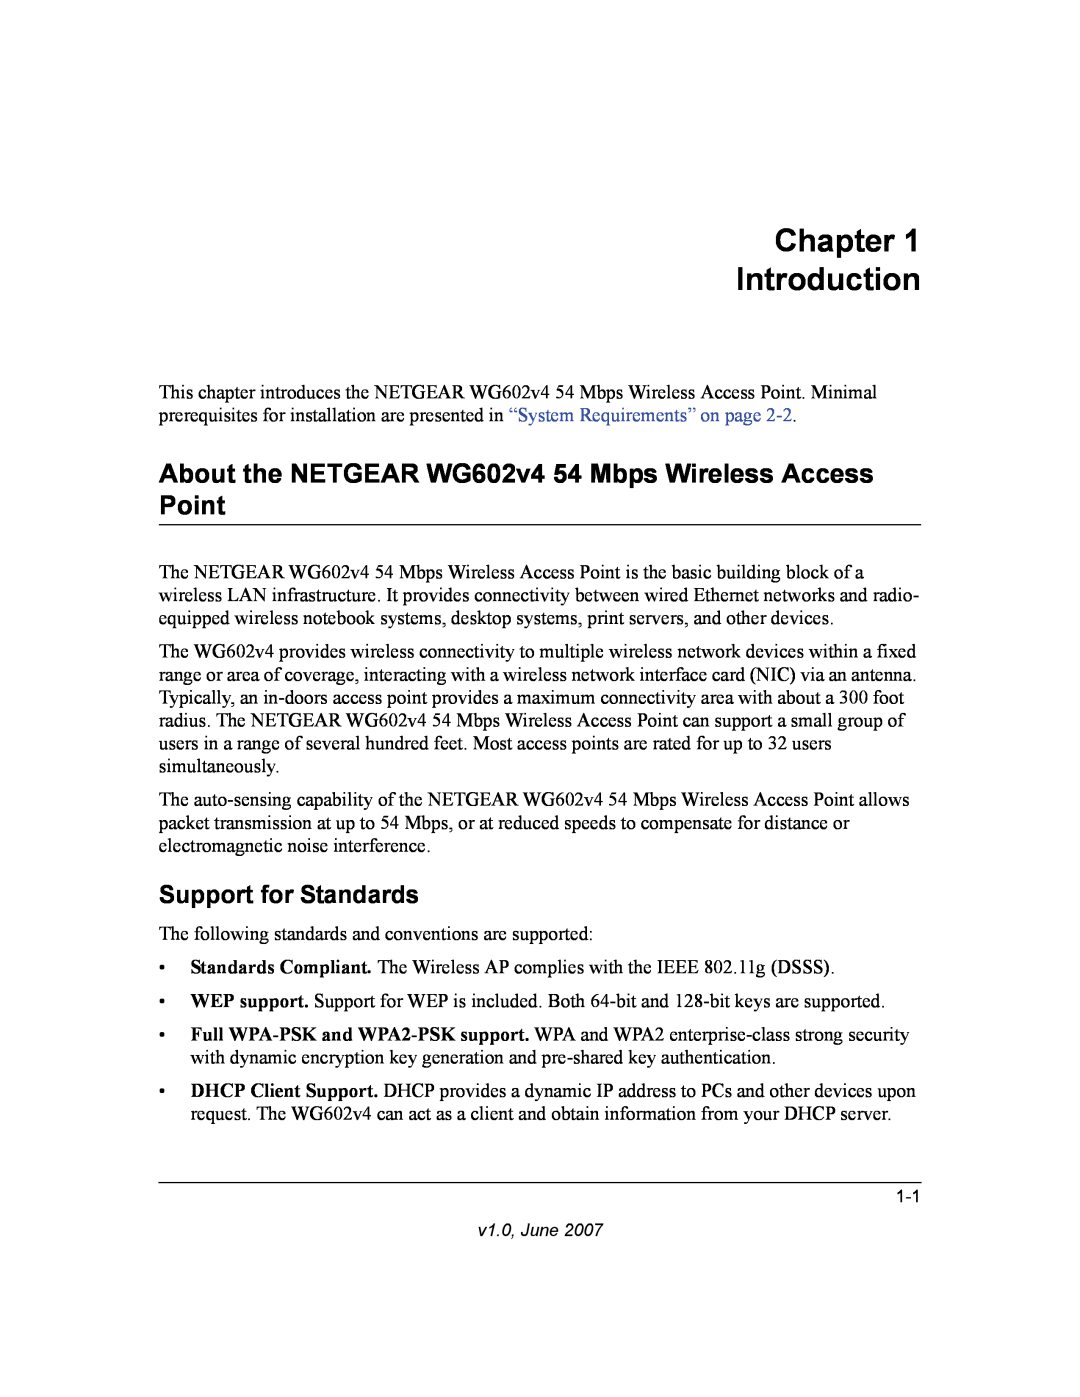 NETGEAR WG602V4 manual Chapter Introduction, About the NETGEAR WG602v4 54 Mbps Wireless Access Point, Support for Standards 